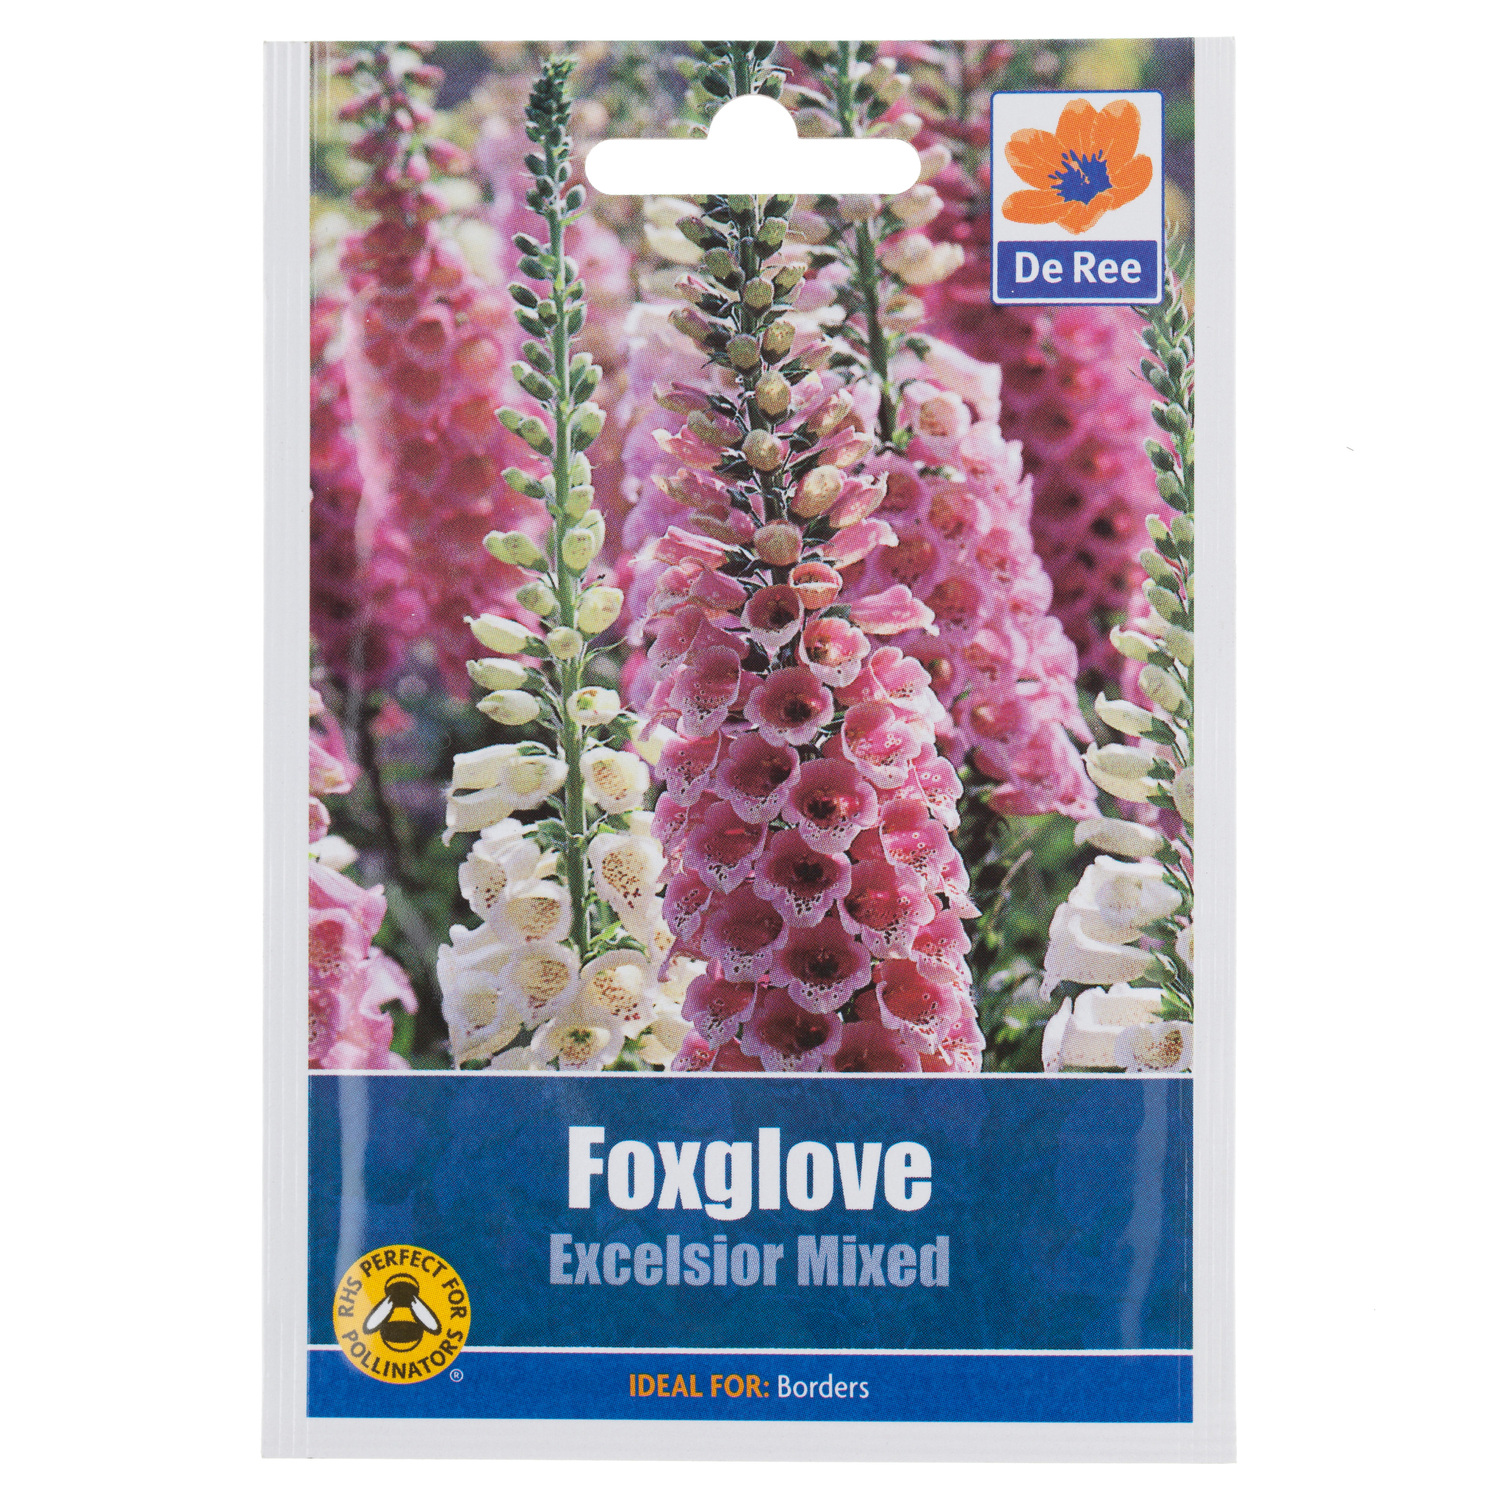 Foxglove Excelsior Mixed Seed Packet Image